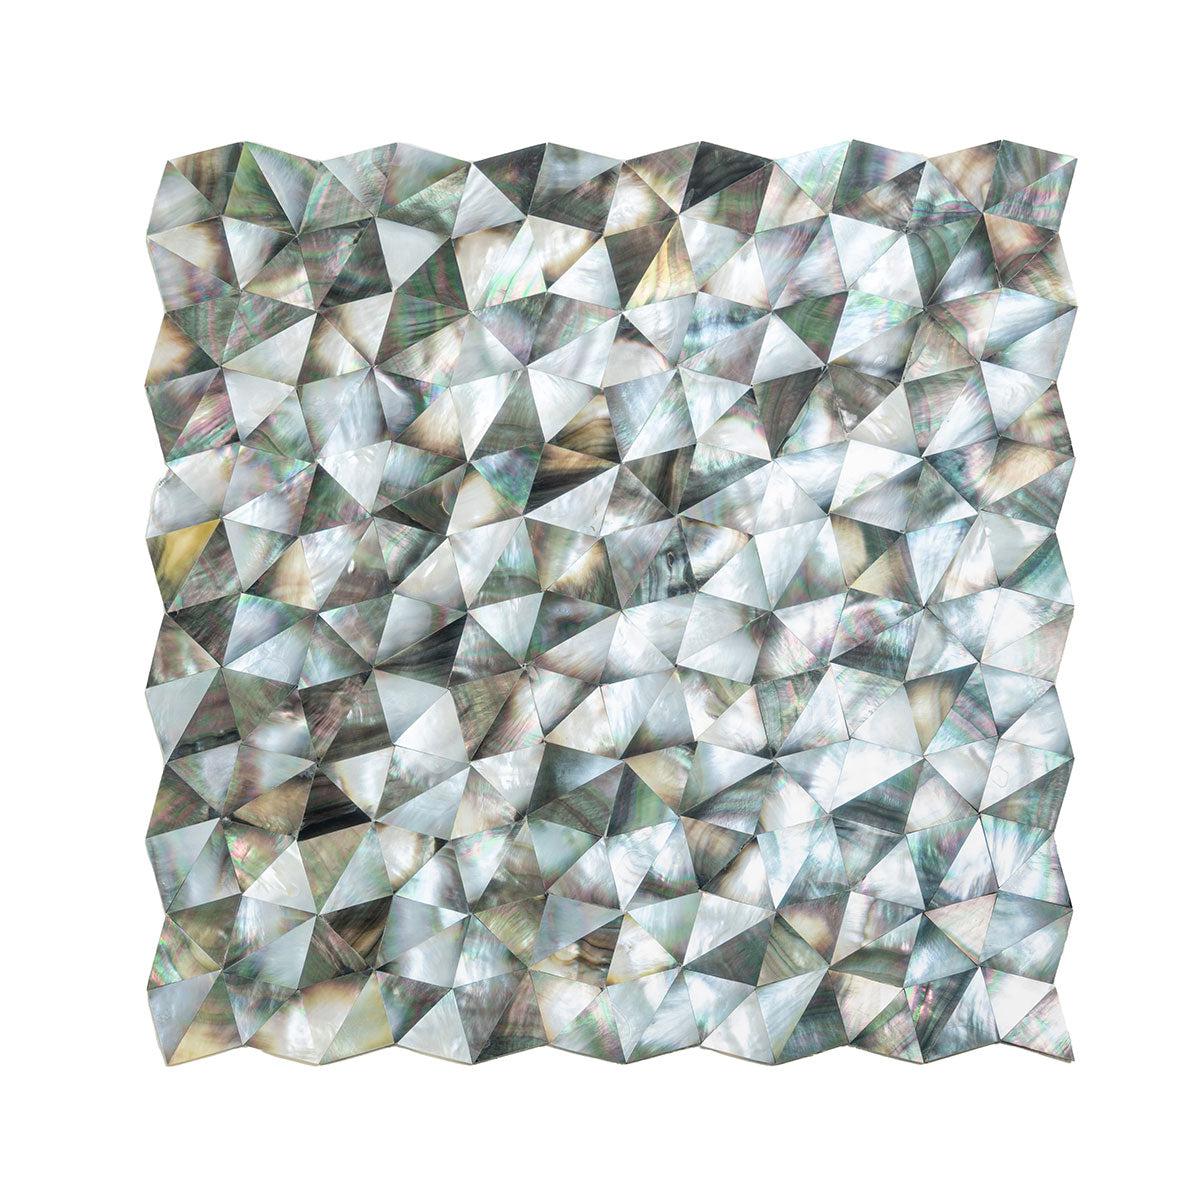 Mother Of Pearl Wild Triangle Mosaic Tile